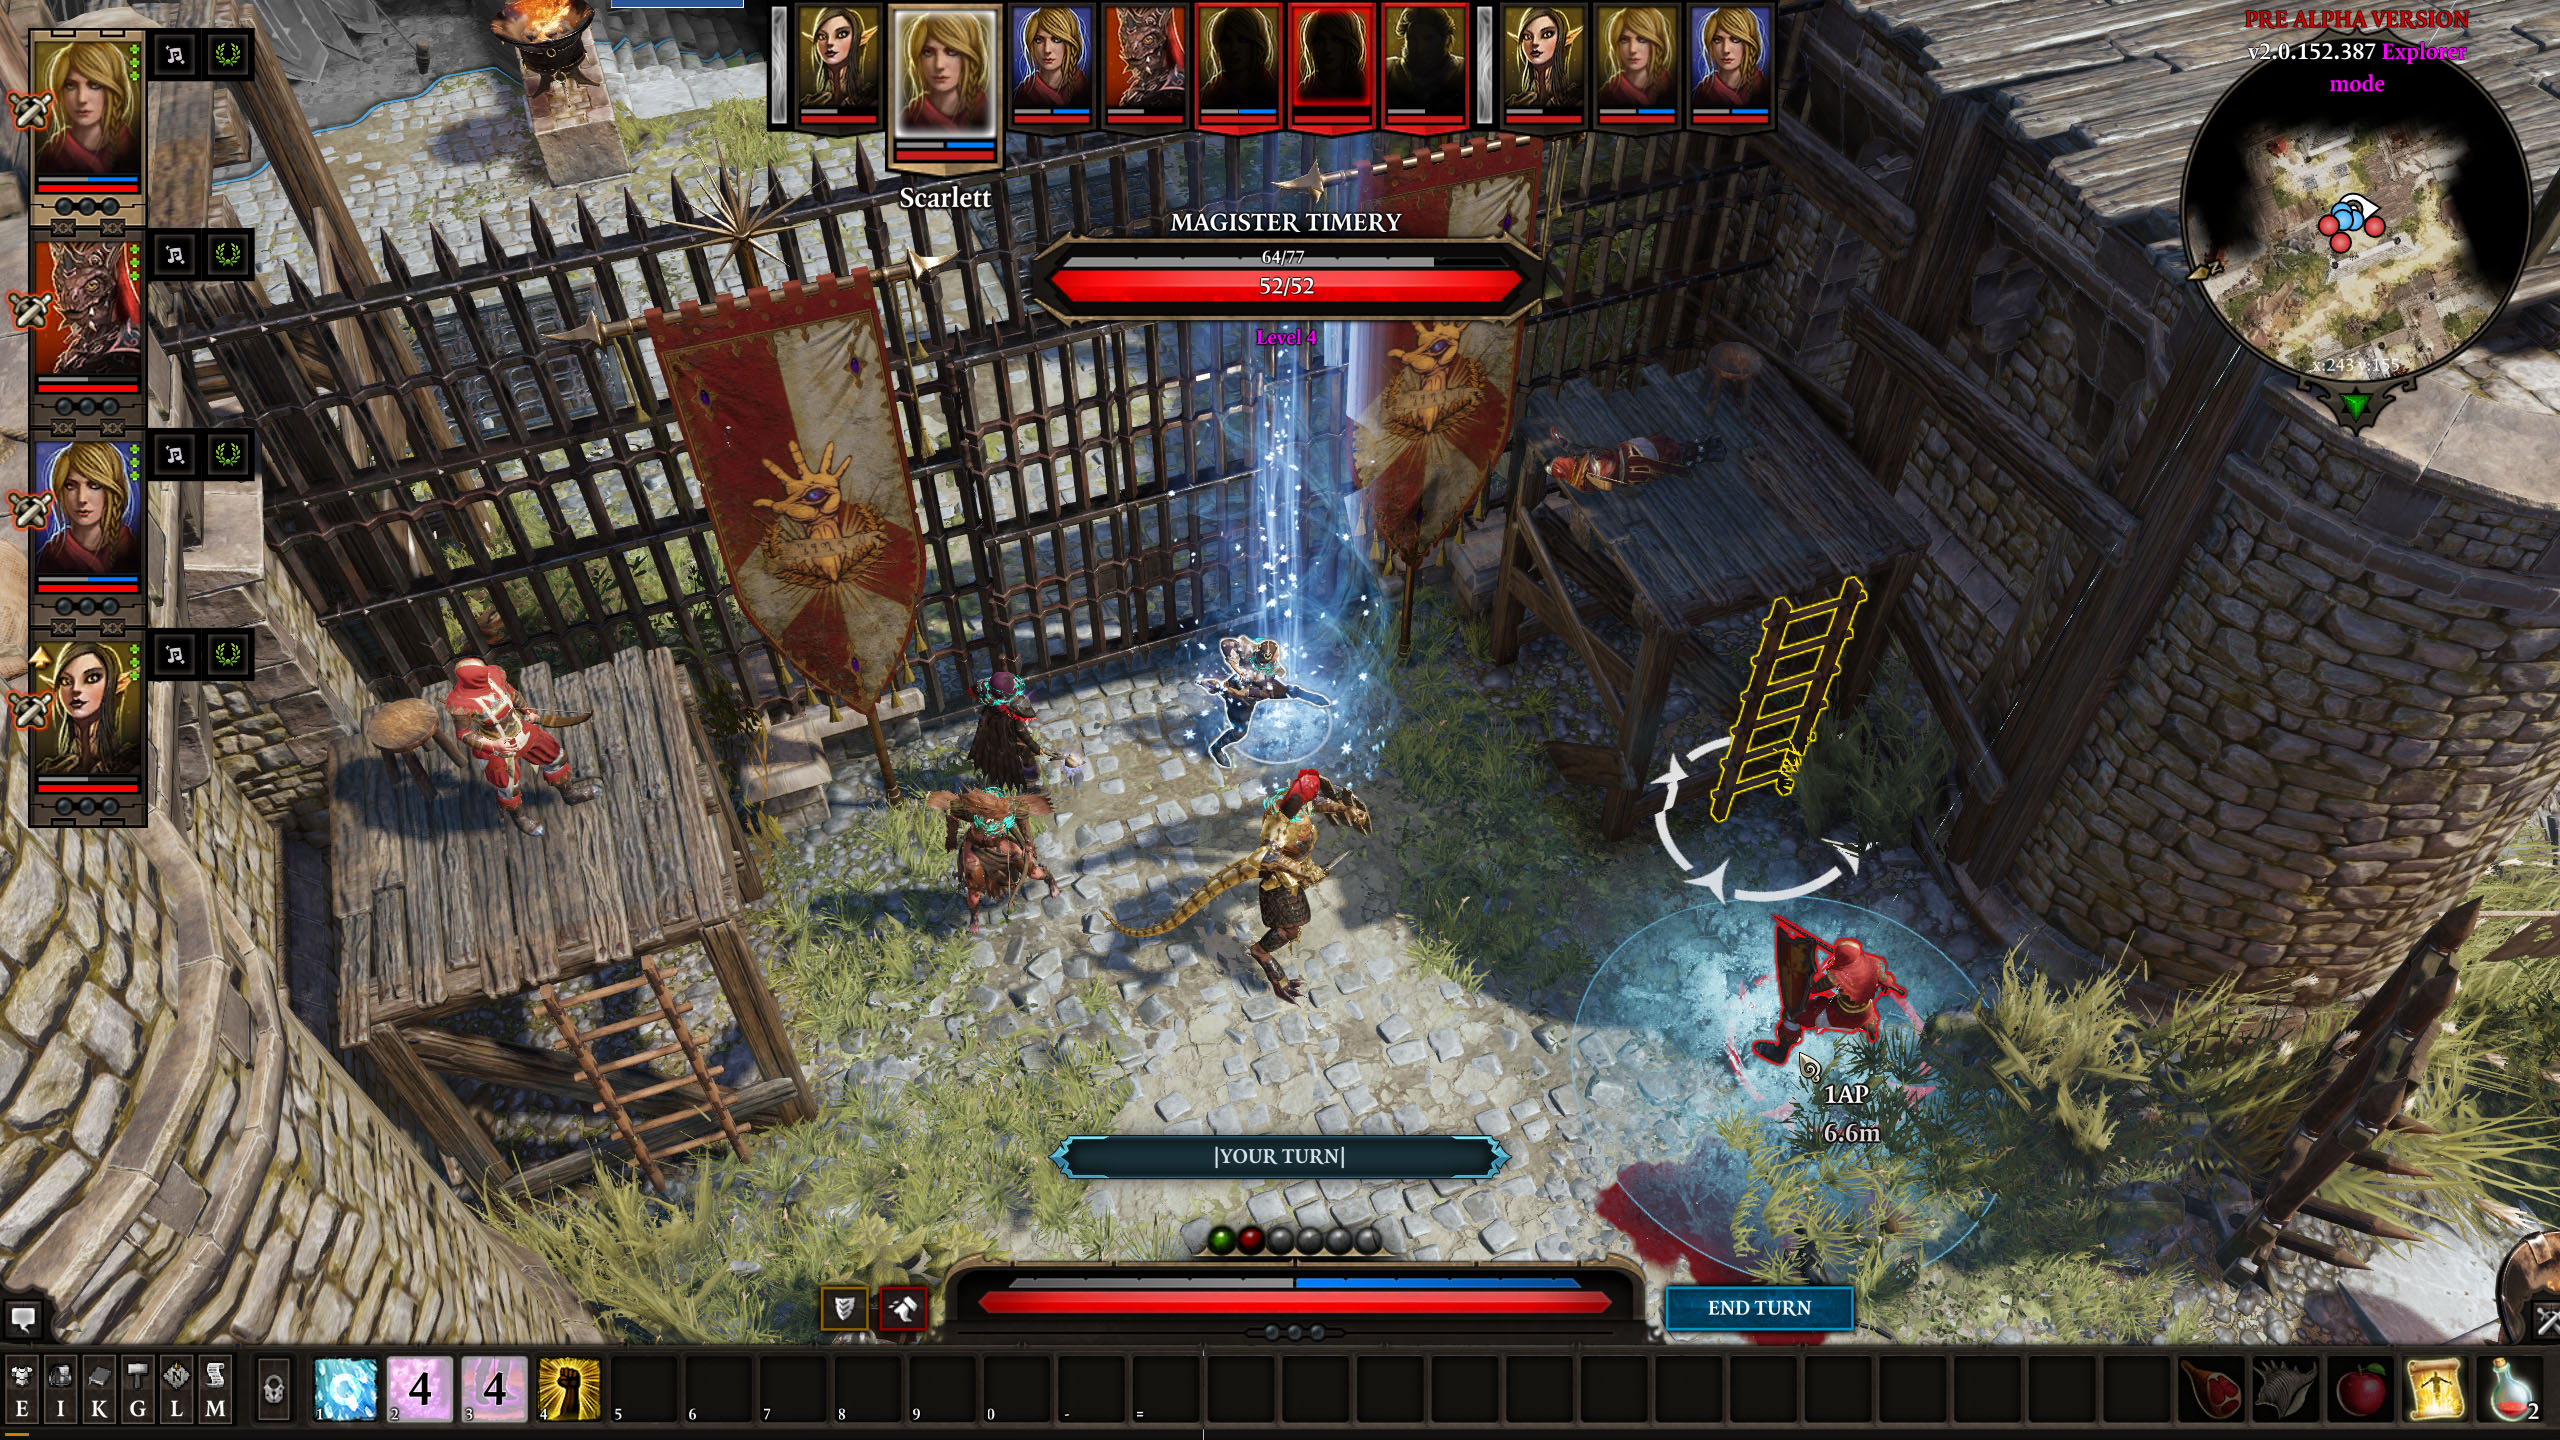 Screenshot for the game Divinity: Original Sin 2 Early Access